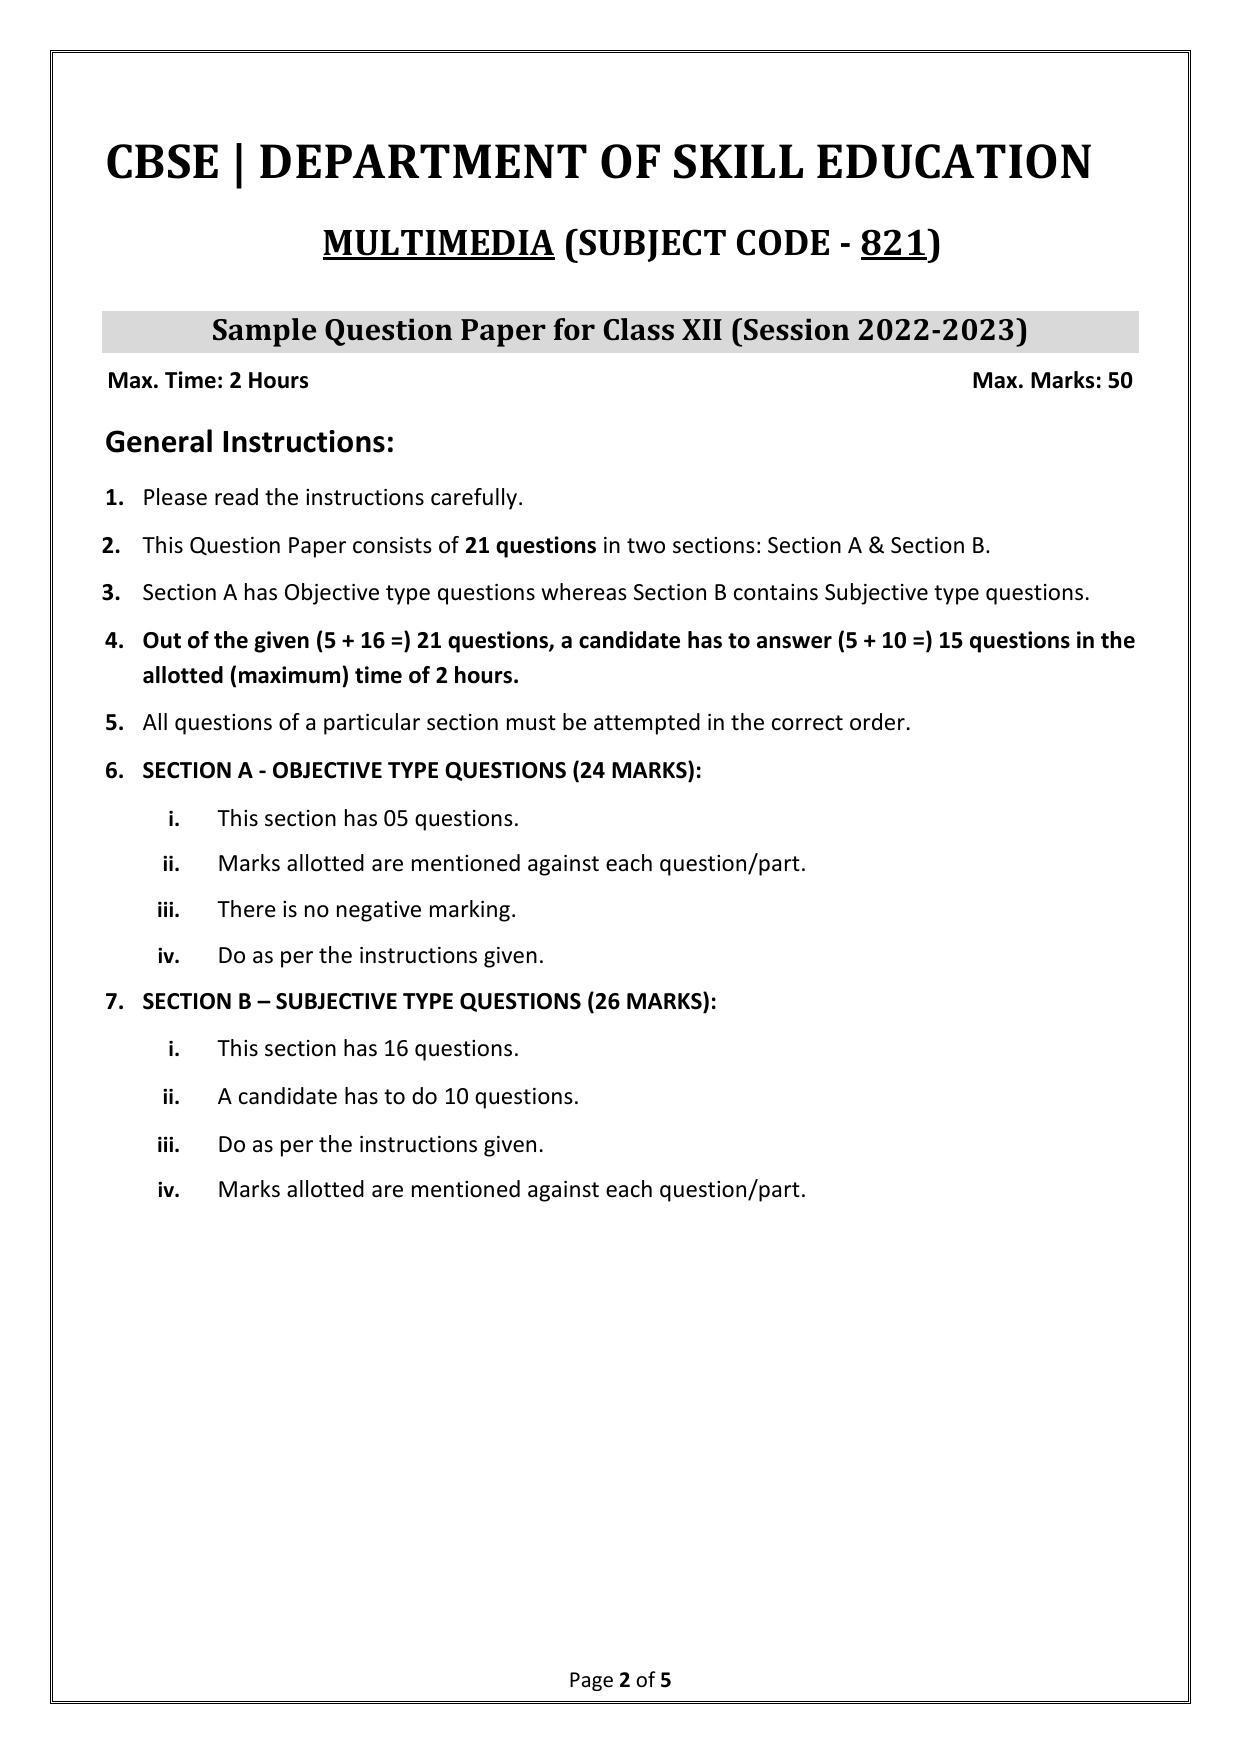 CBSE Class 12 Multi Media (Skill Education) Sample Papers 2023 - Page 2